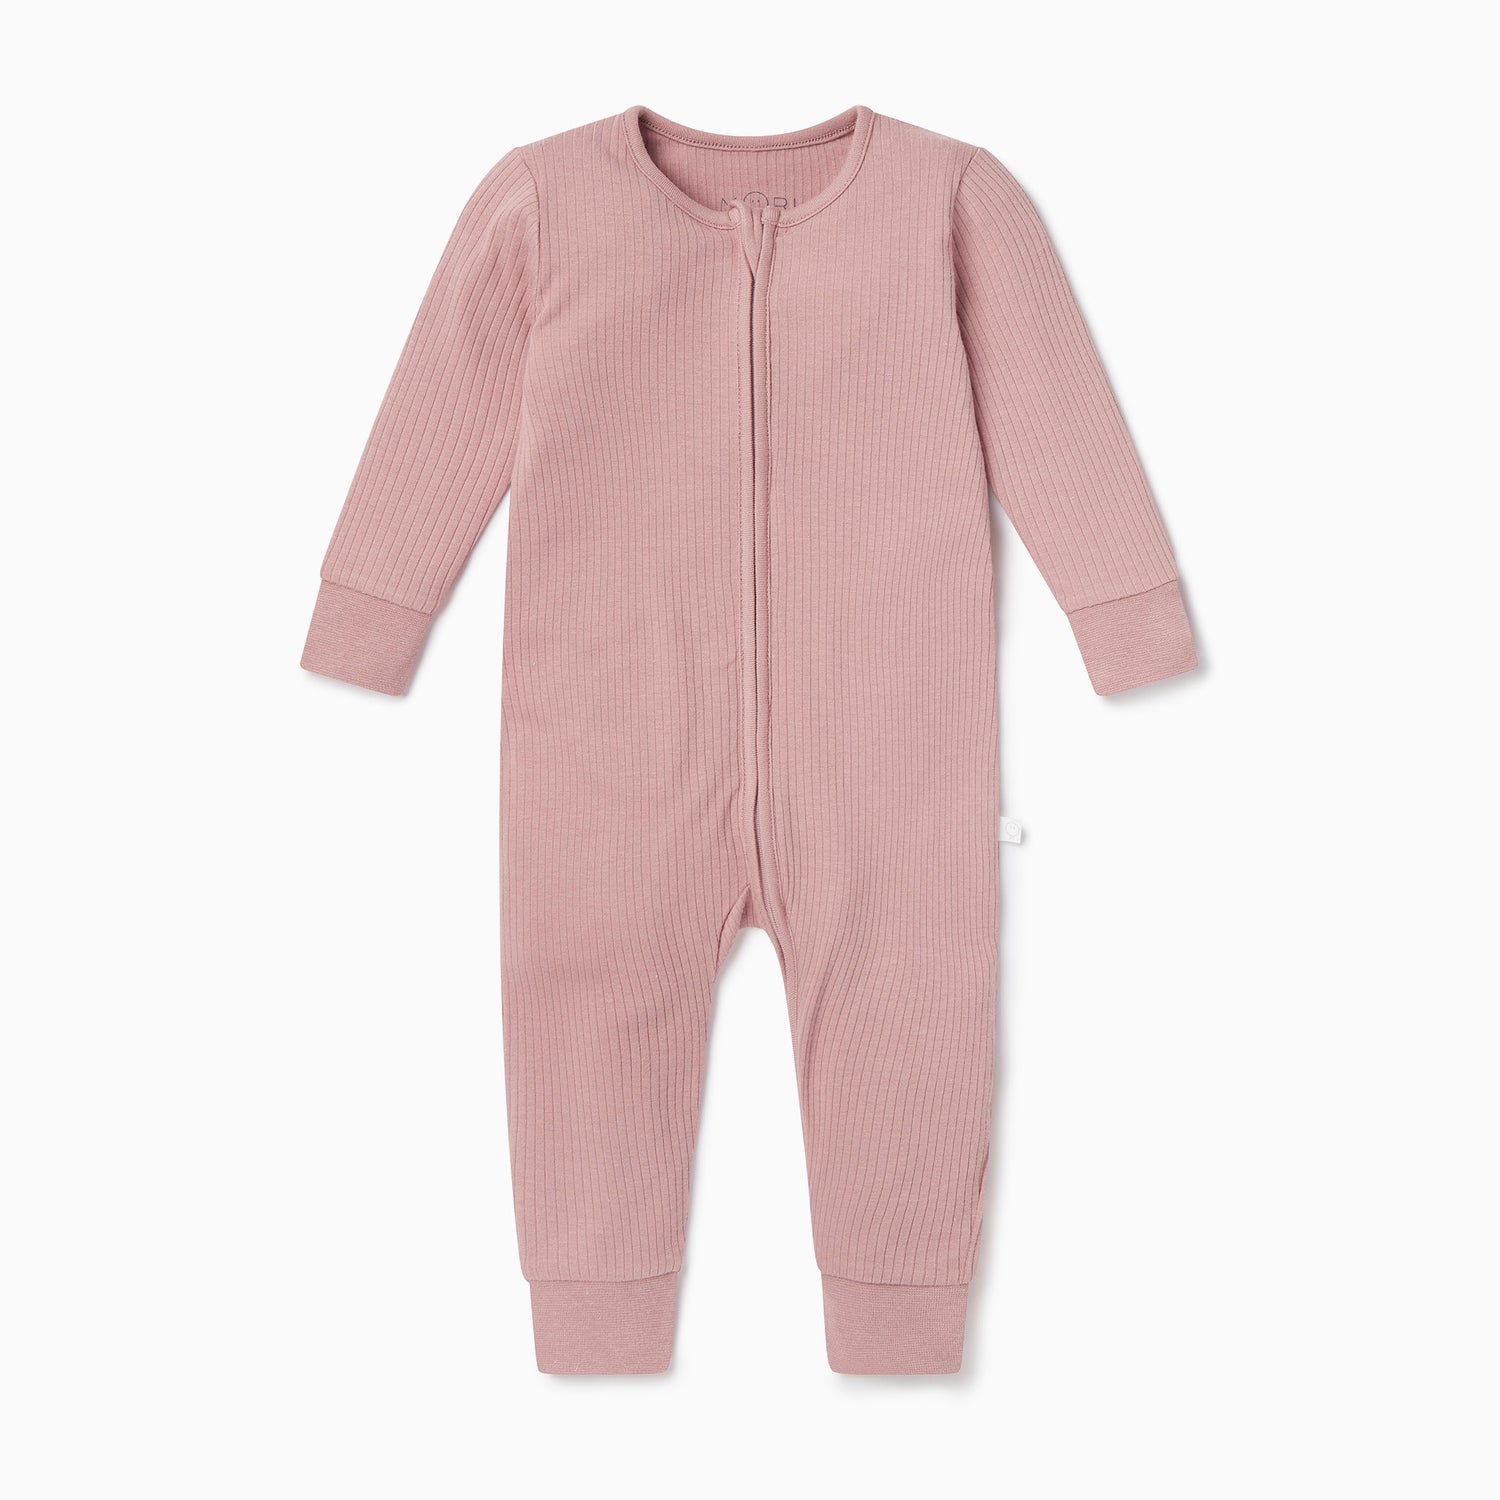 Rose zip up sleepsuit with no feet